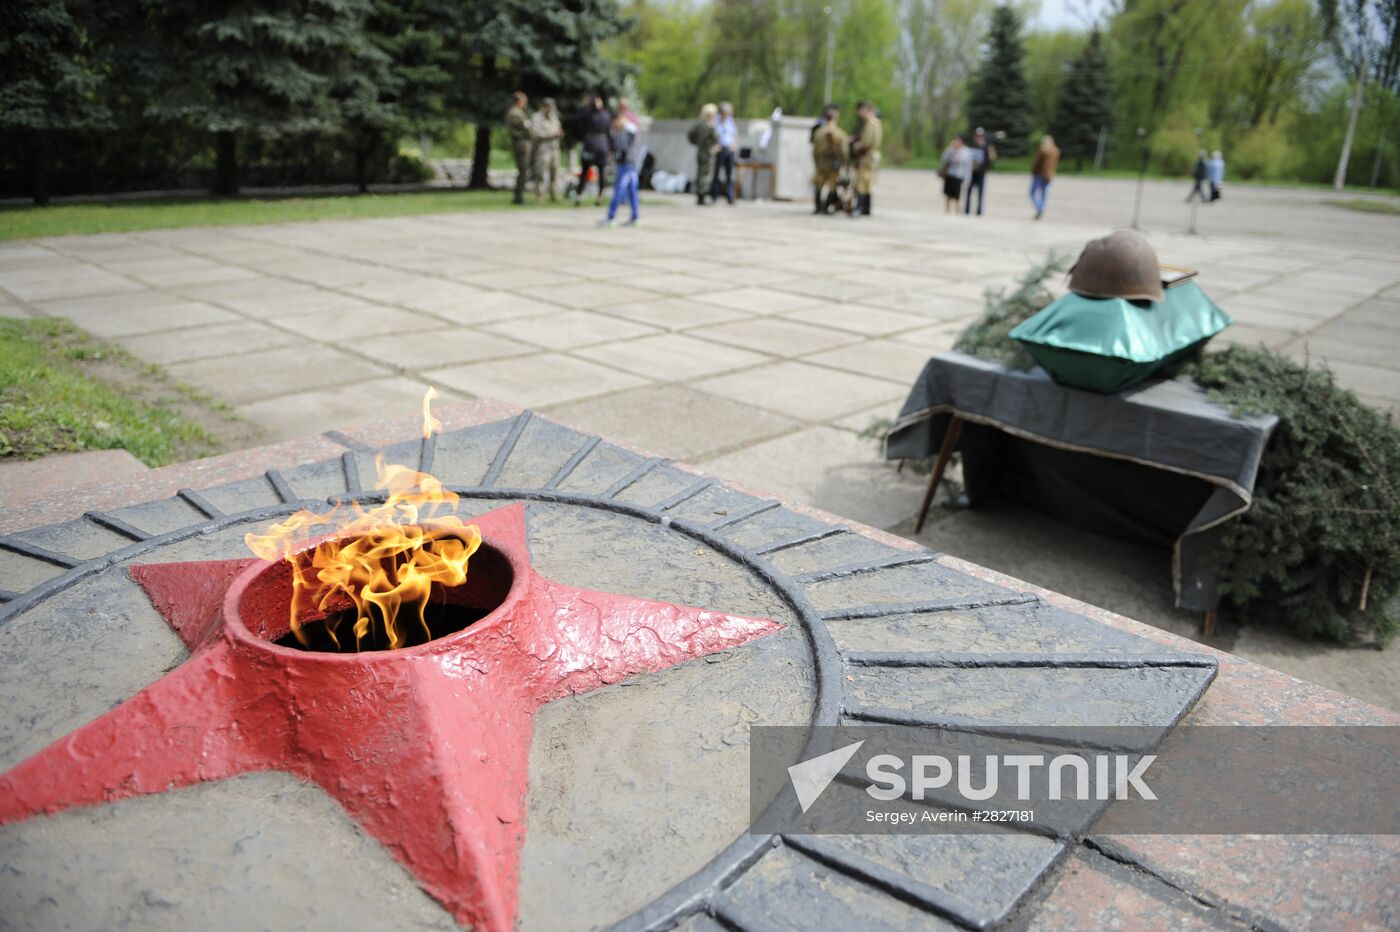 Relics of serviceman killed in action in 1943 during battle for Slavyansk transferred to Russia